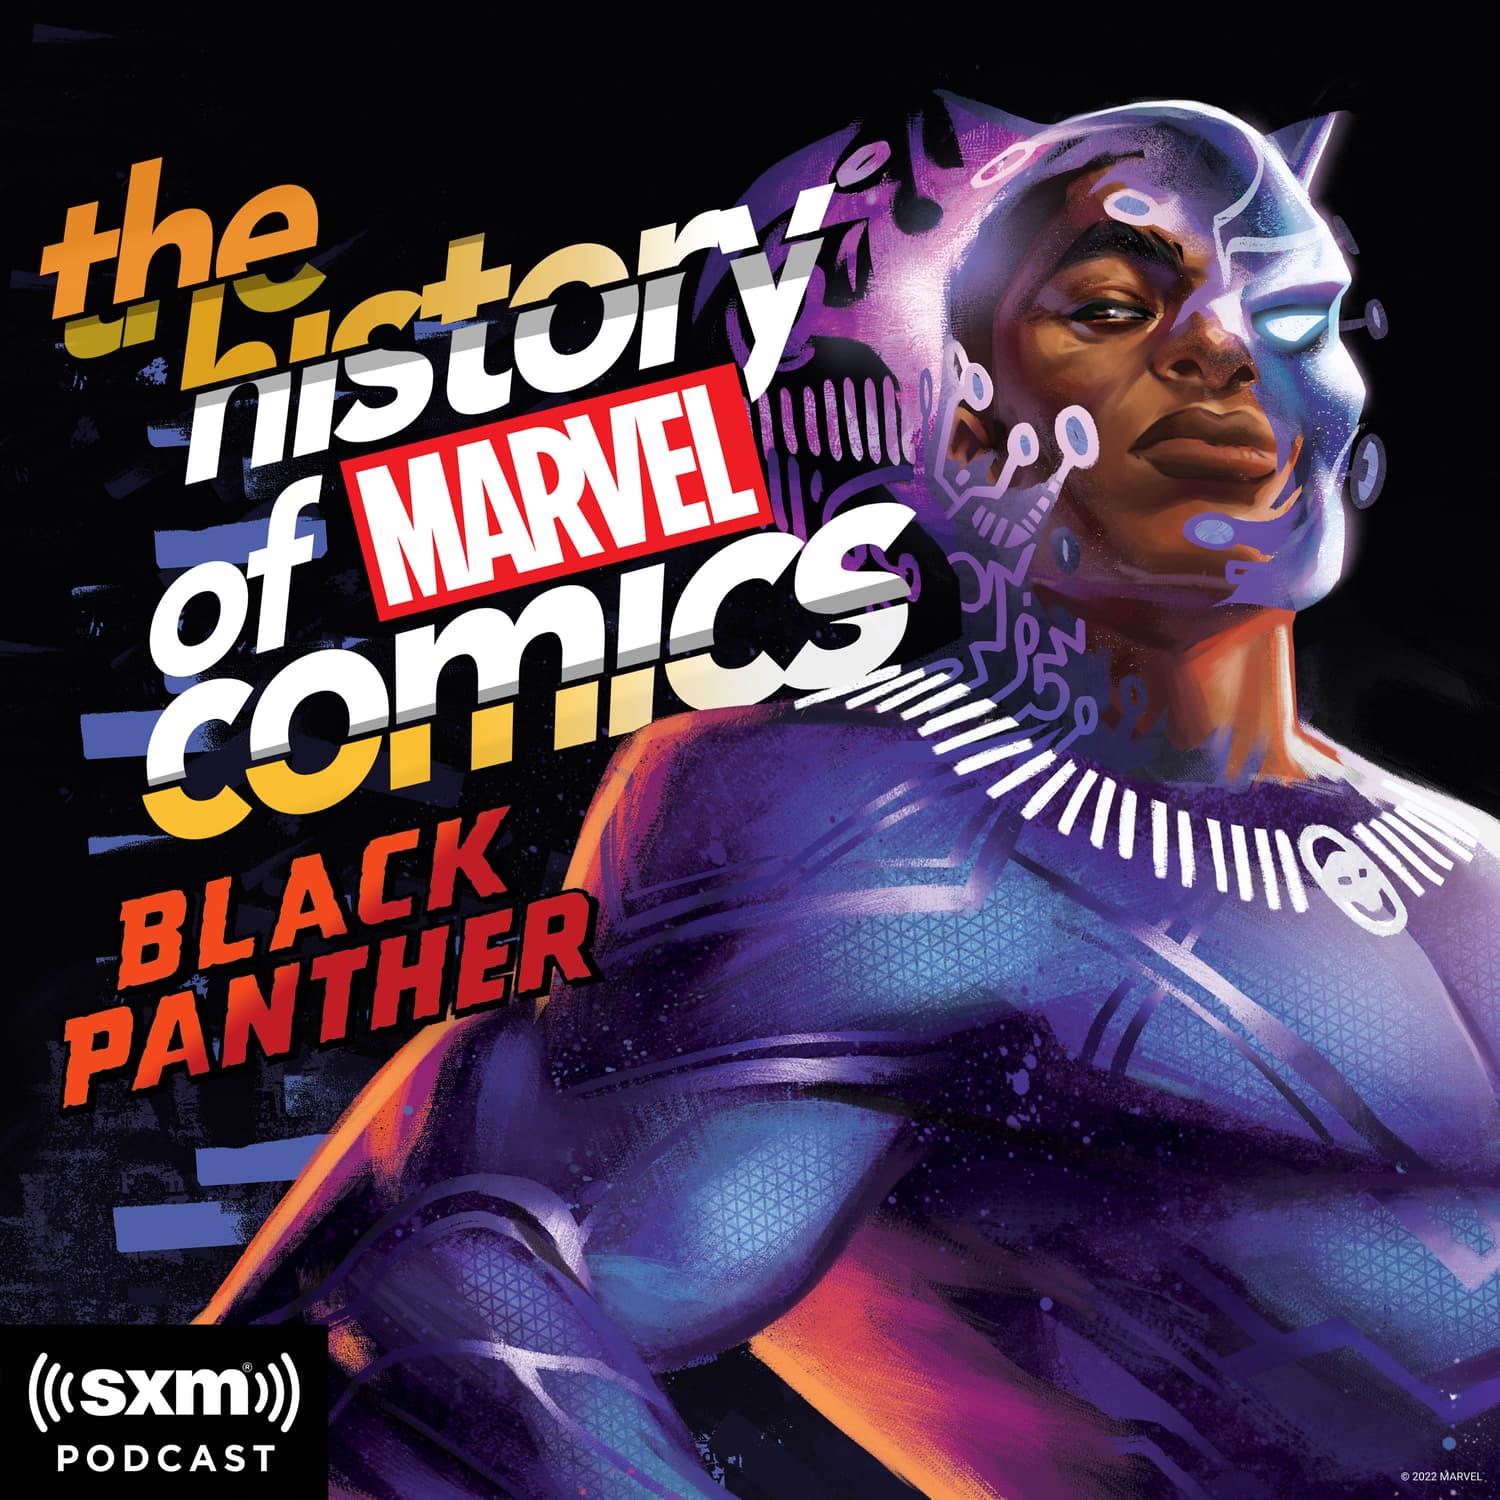 The History of Marvel Comics: Black Panther,